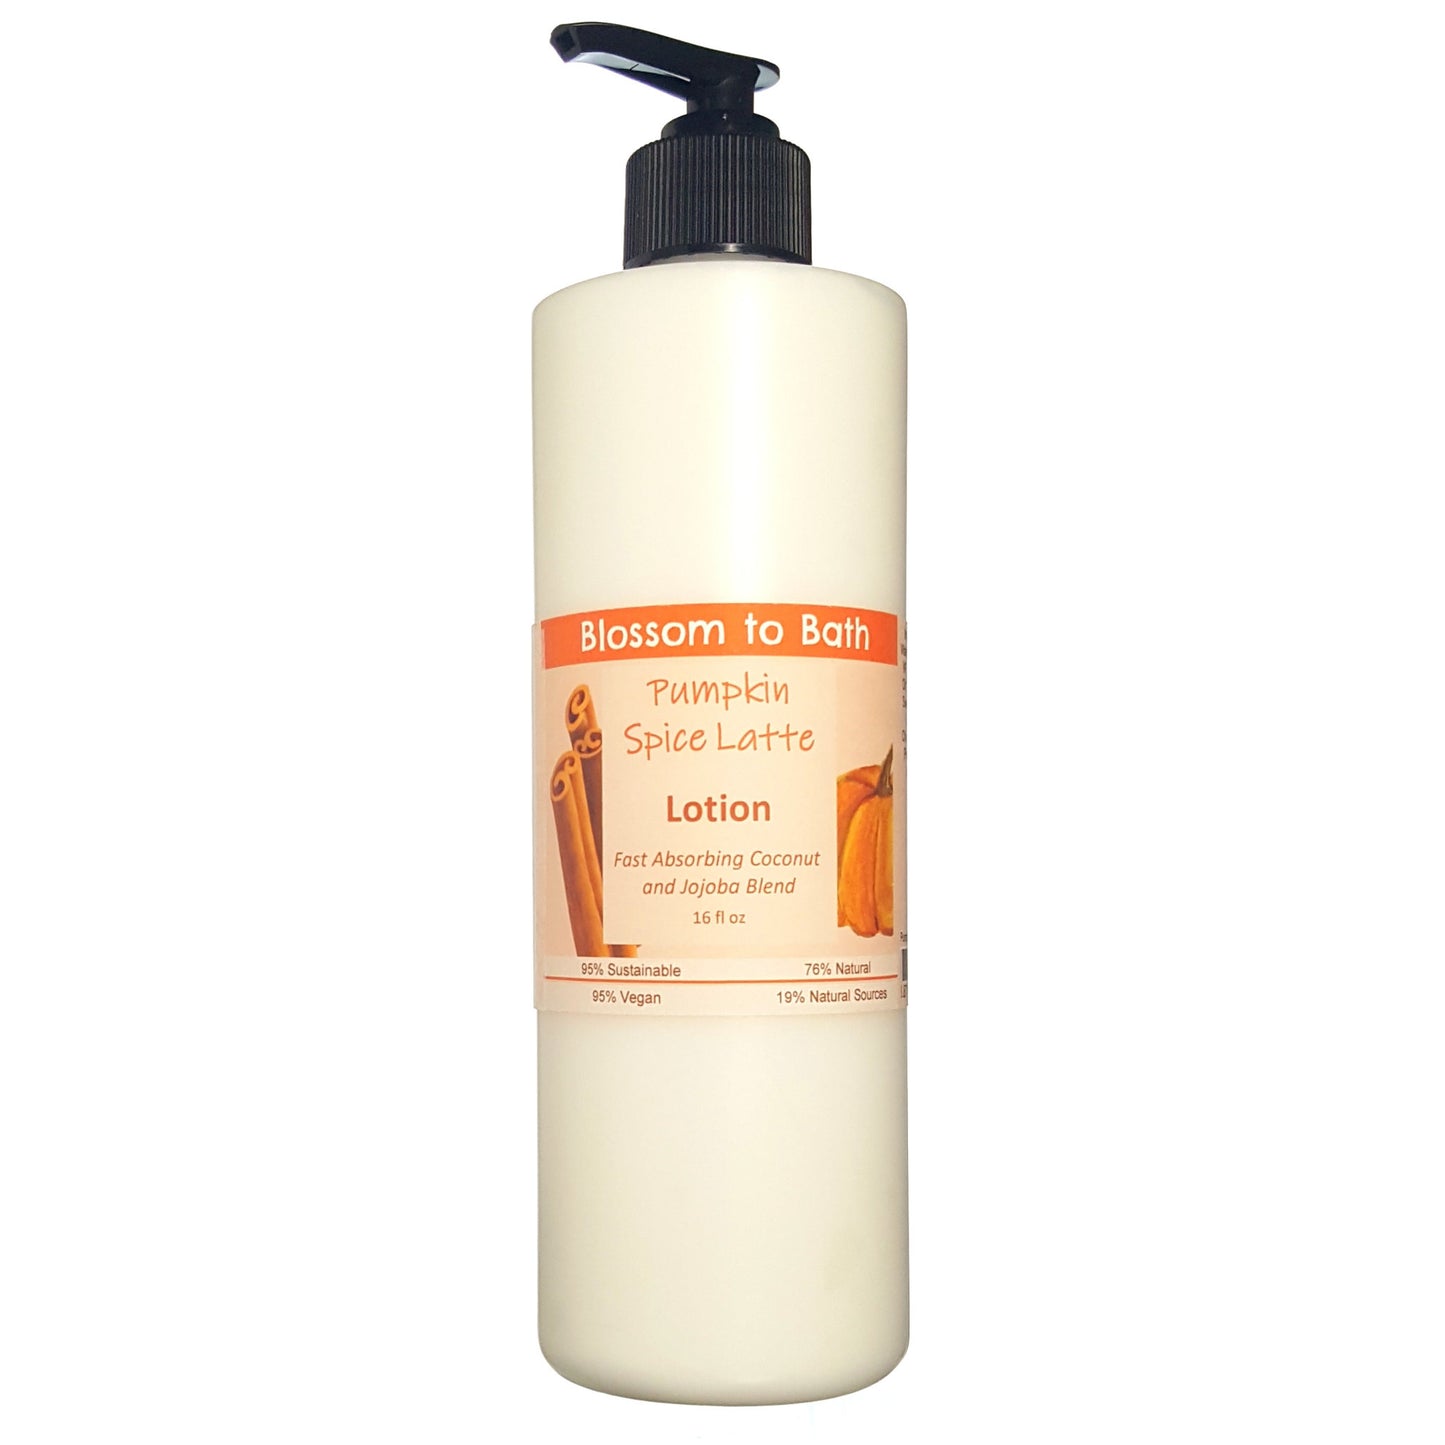 Buy Blossom to Bath Pumpkin Spice Latte Lotion from Flowersong Soap Studio.  Daily moisture luxury that soaks in quickly made with organic oils and butters that soften and smooth the skin  Deep vanilla and lightly fruited spice blend seamlessly with rich coffee.